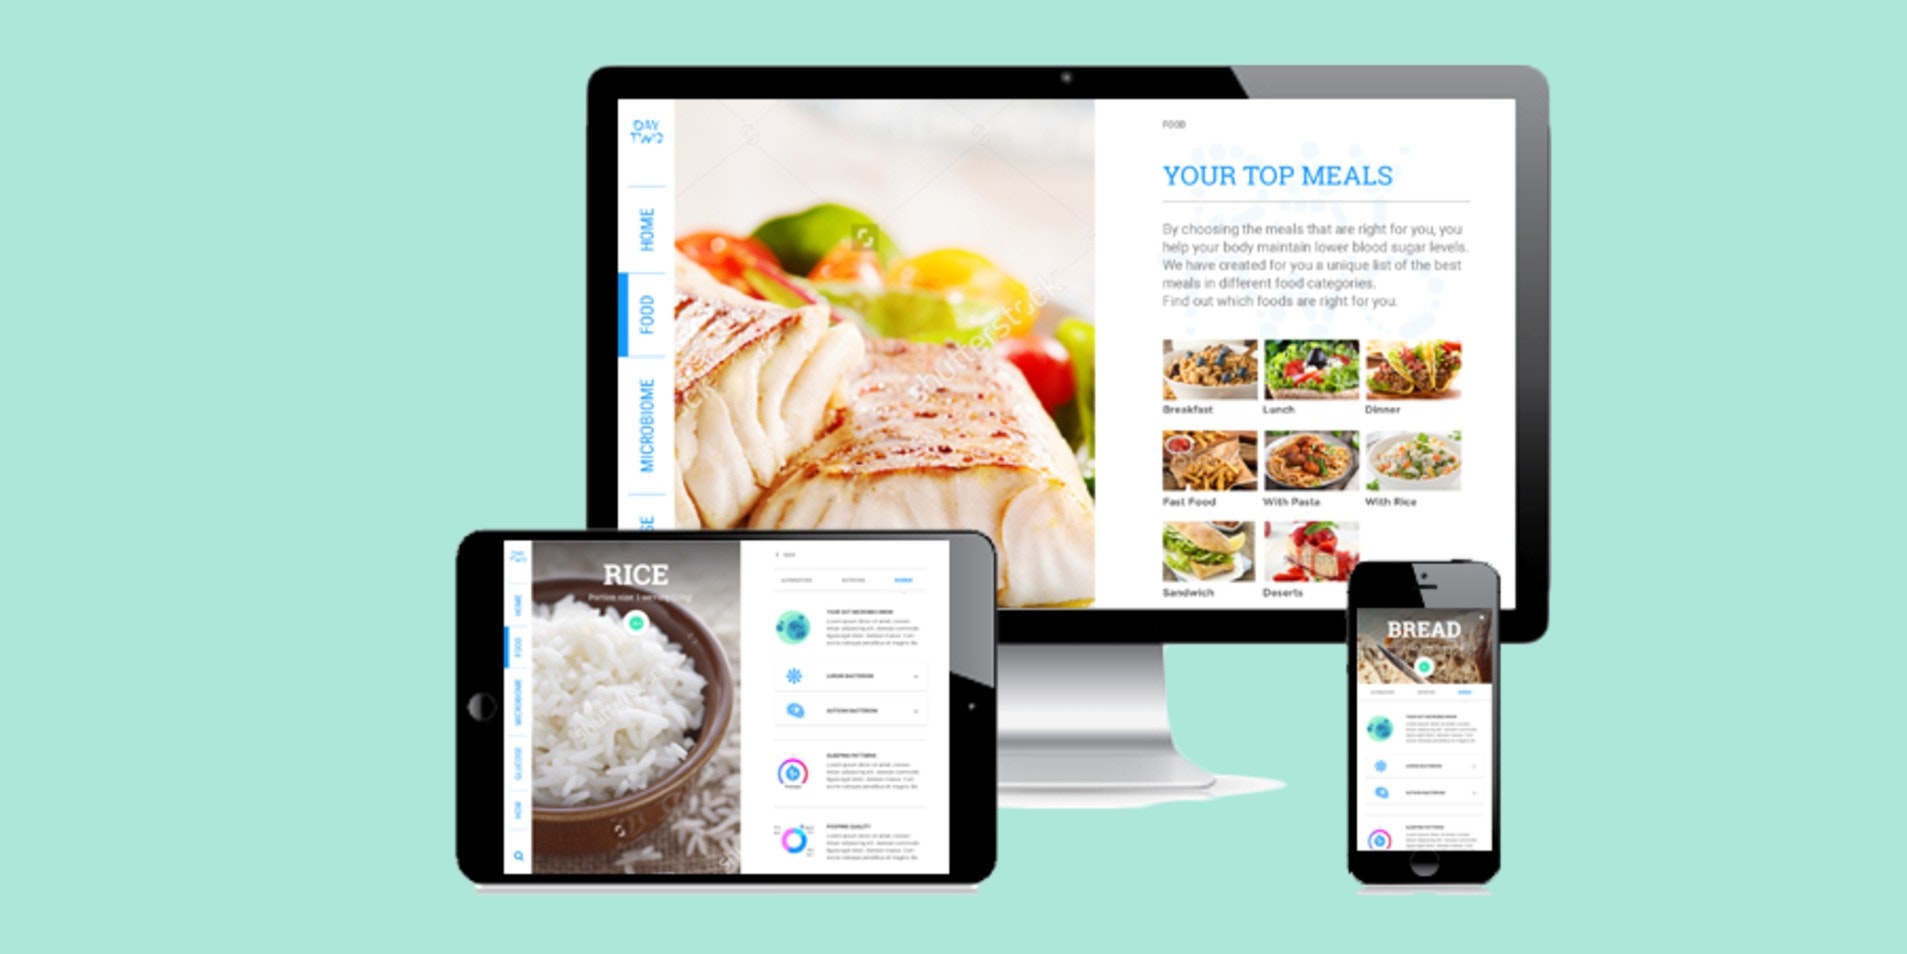 DayTwo's meal recommendation platform is designed to help people manage their diabetes. 